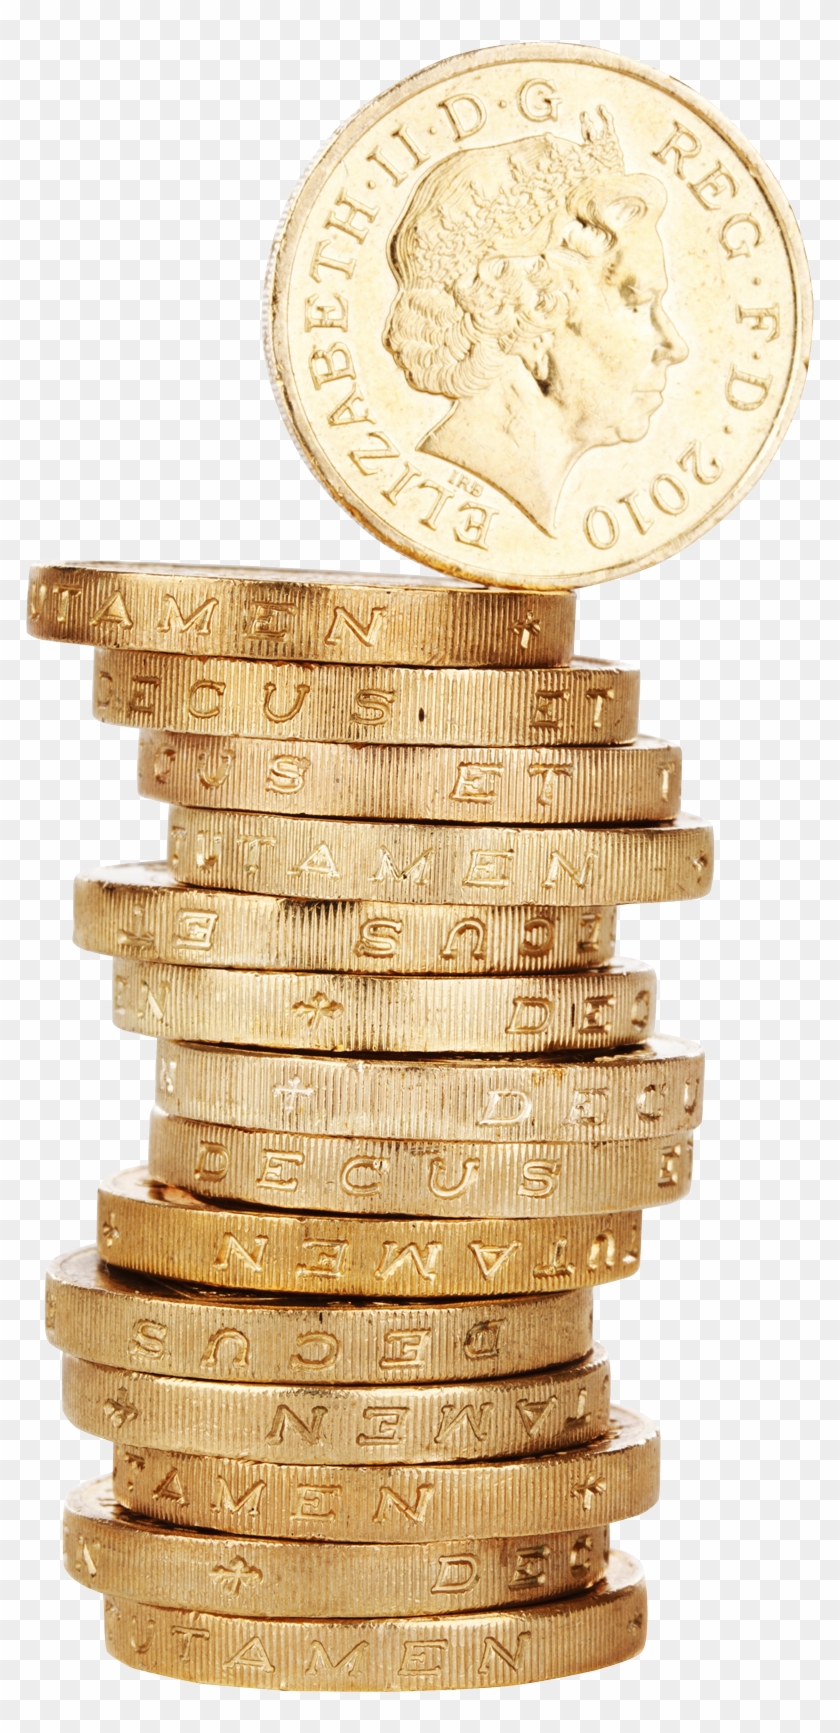 Golden Coins Stack Png Transparent Image - Coin Stack Clipart #38674